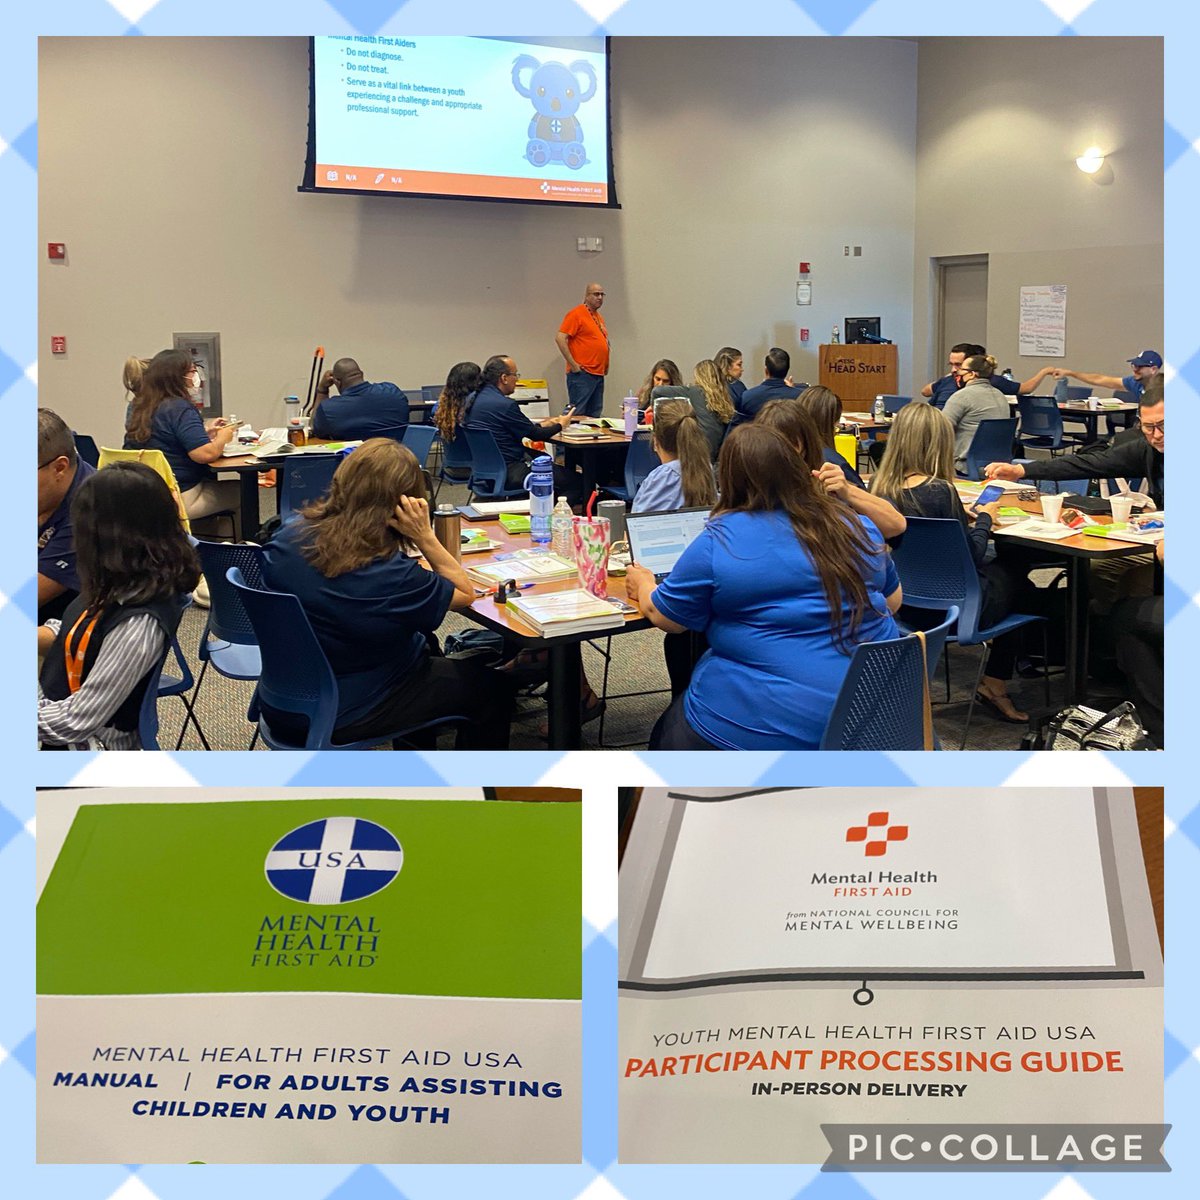 GEMS💎🦅 family building collective relational agency on mental health first aid at R19 ESC MPC. #Safekeepers💪🏼#PeoplePassionPurpose